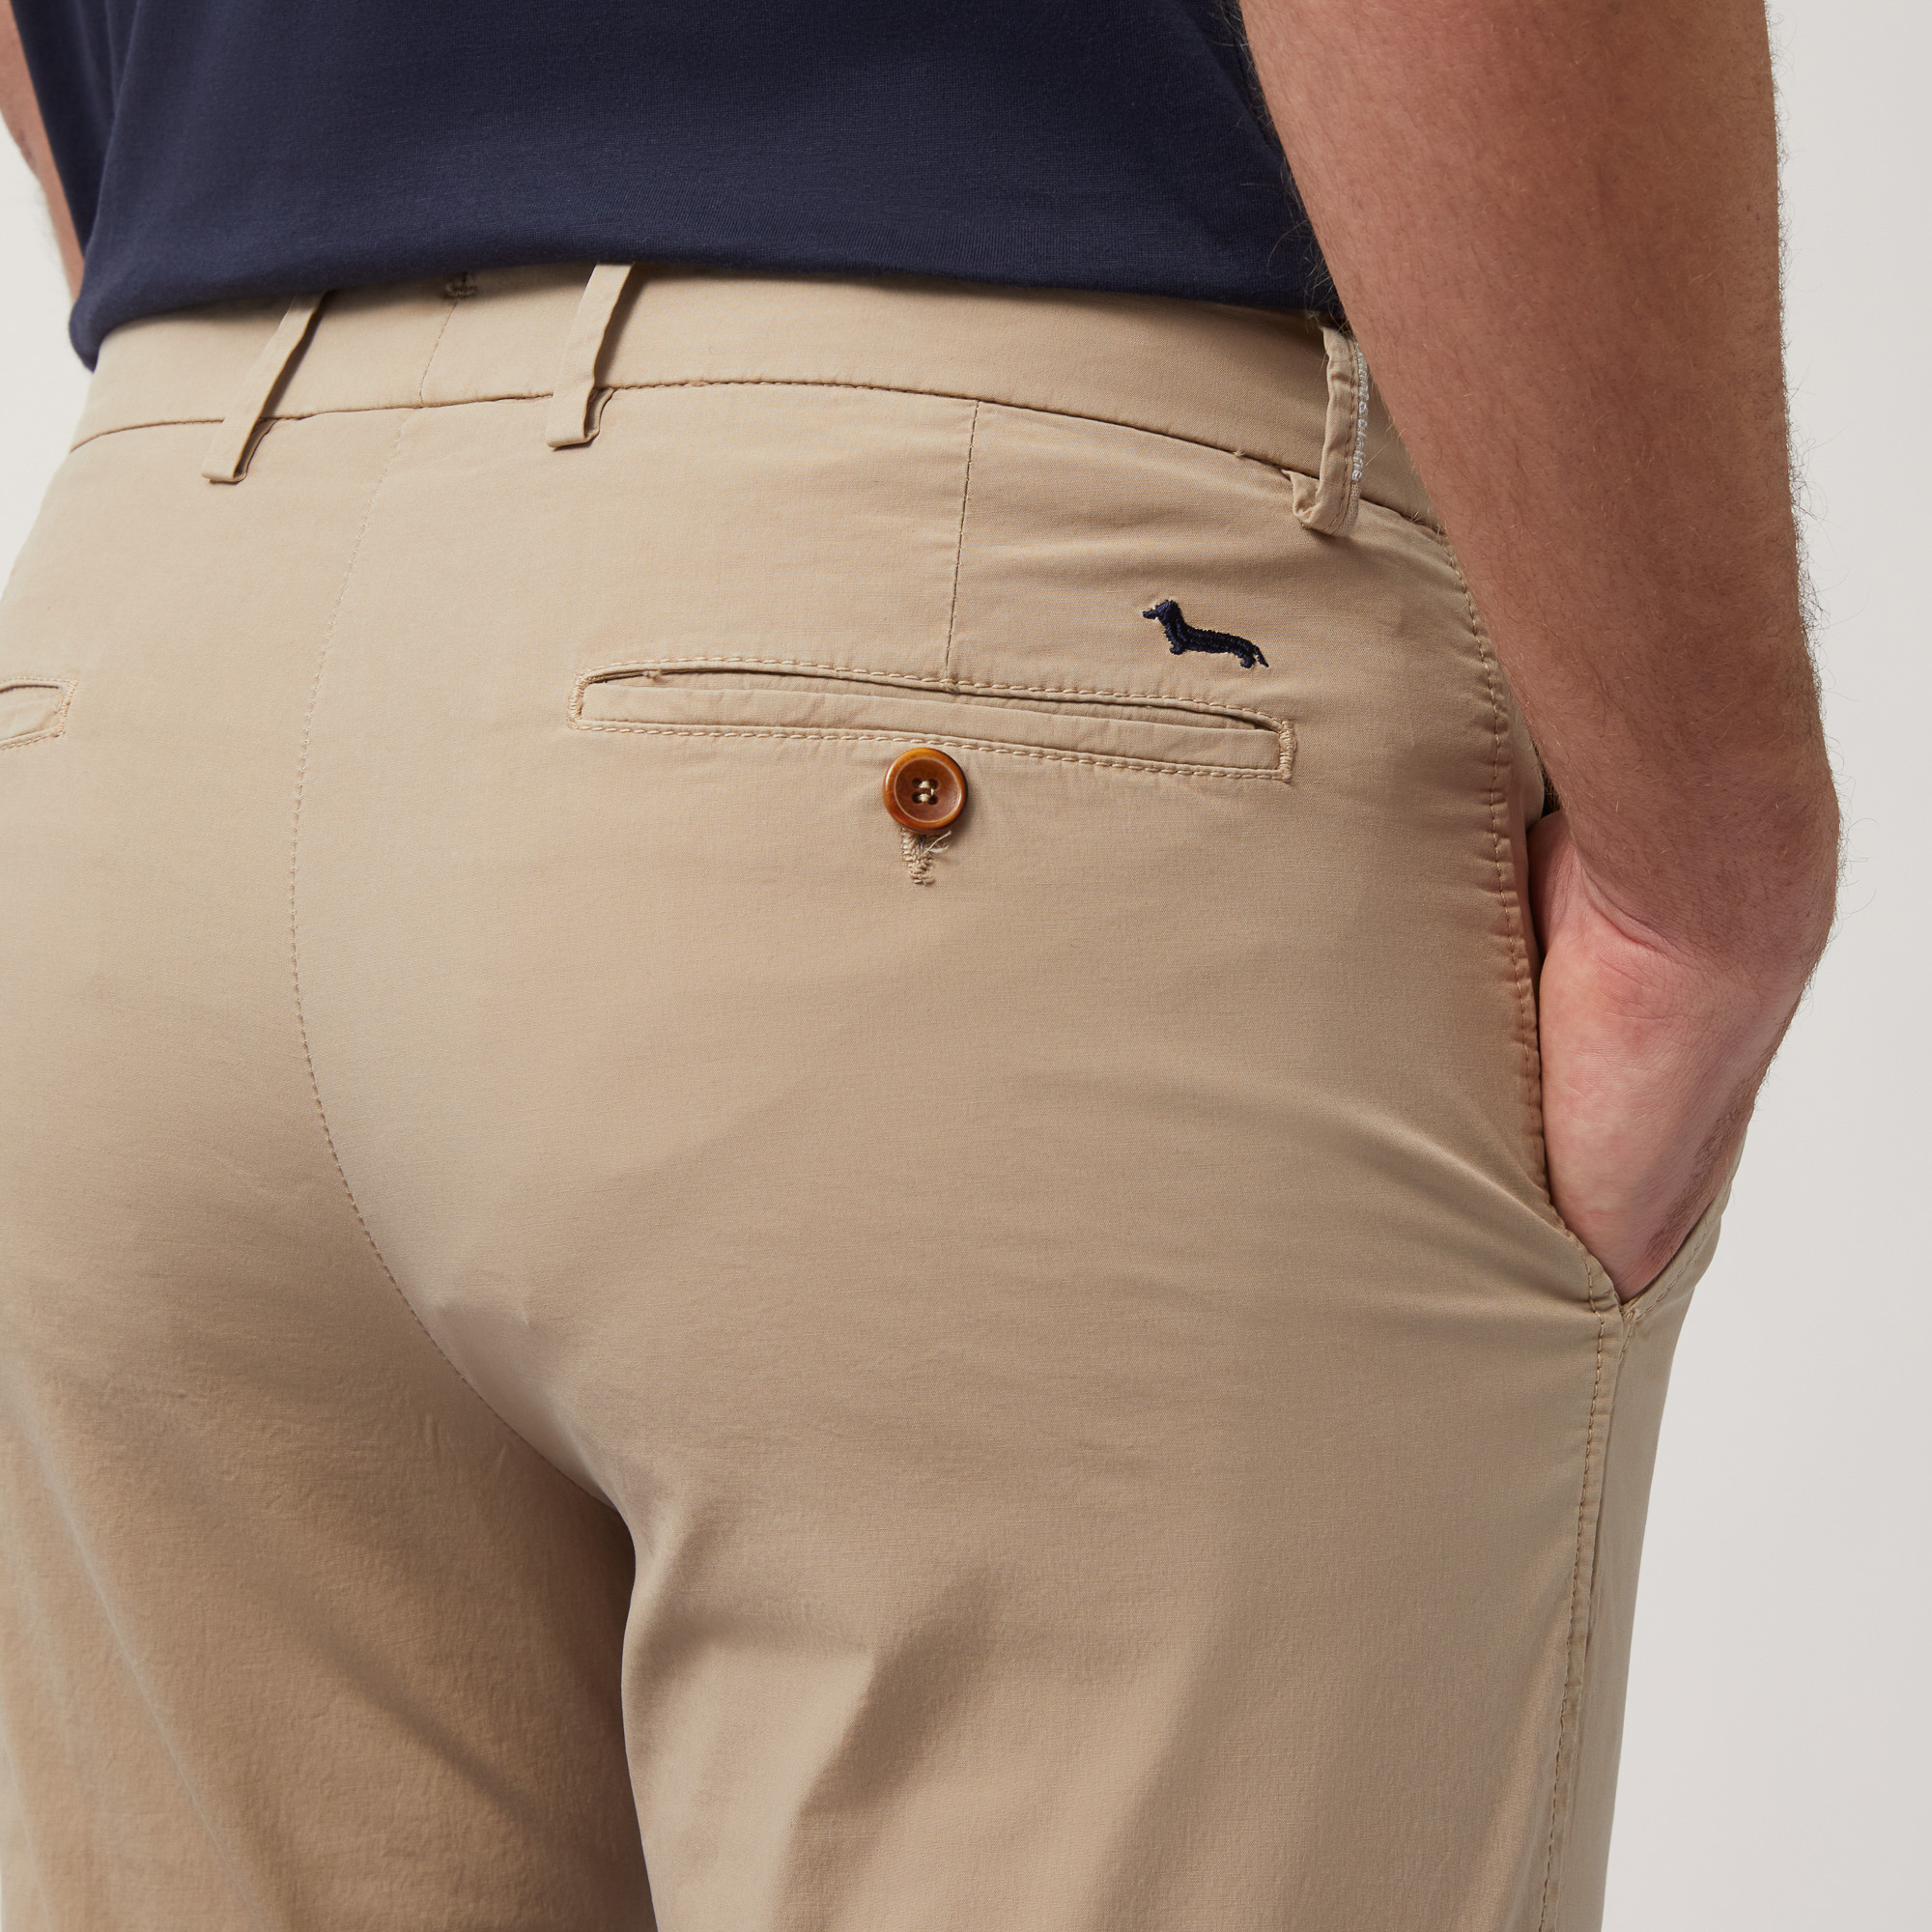 Chino-Hose Narrow Fit, Gelb, large image number 2